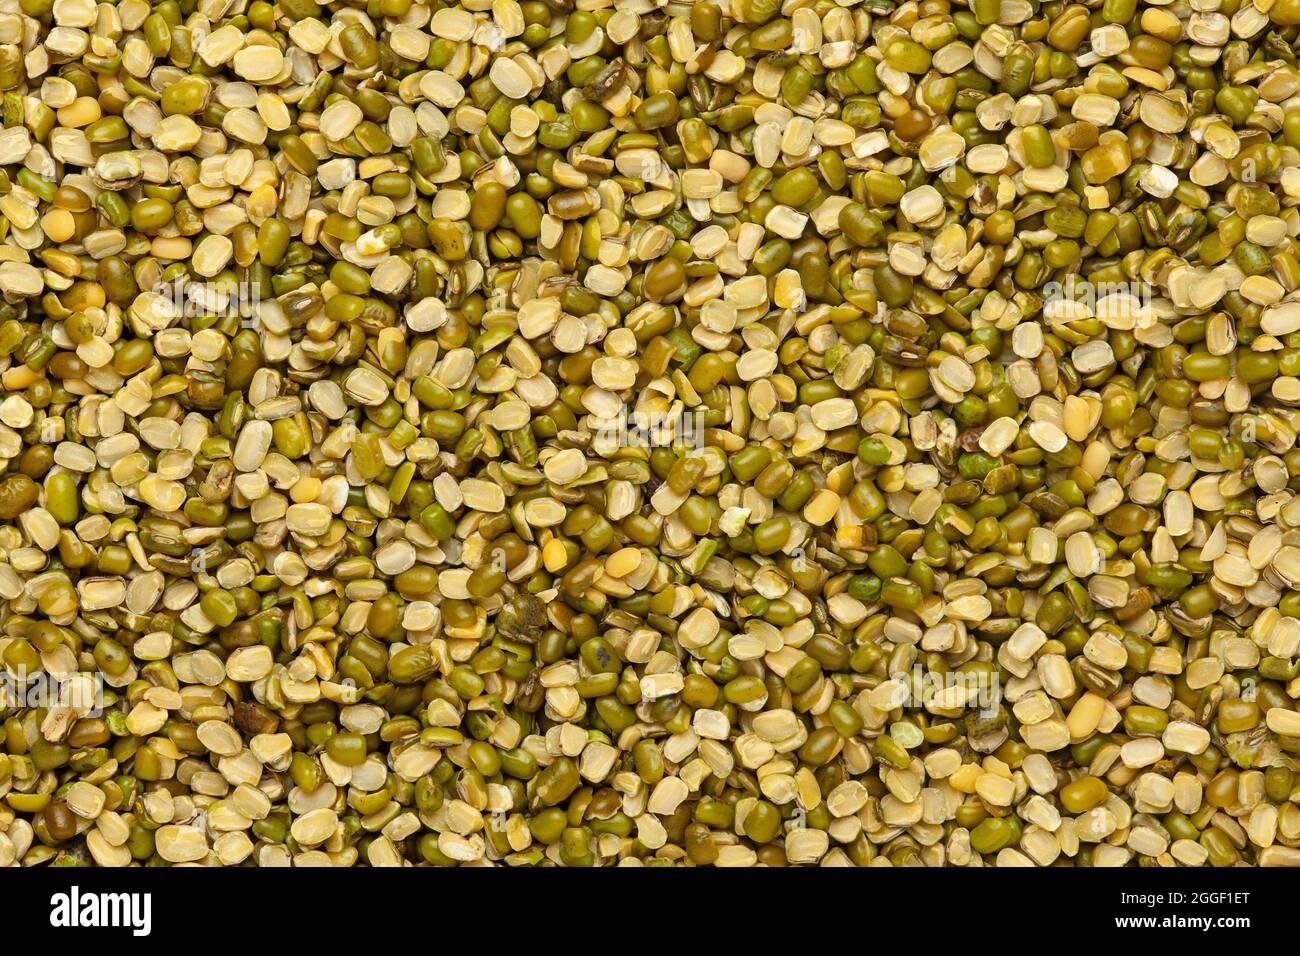 Close up of Organic green Gram (Vigna radiata) or spilt green moong dal unpolished spilled. Top view Stock Photo